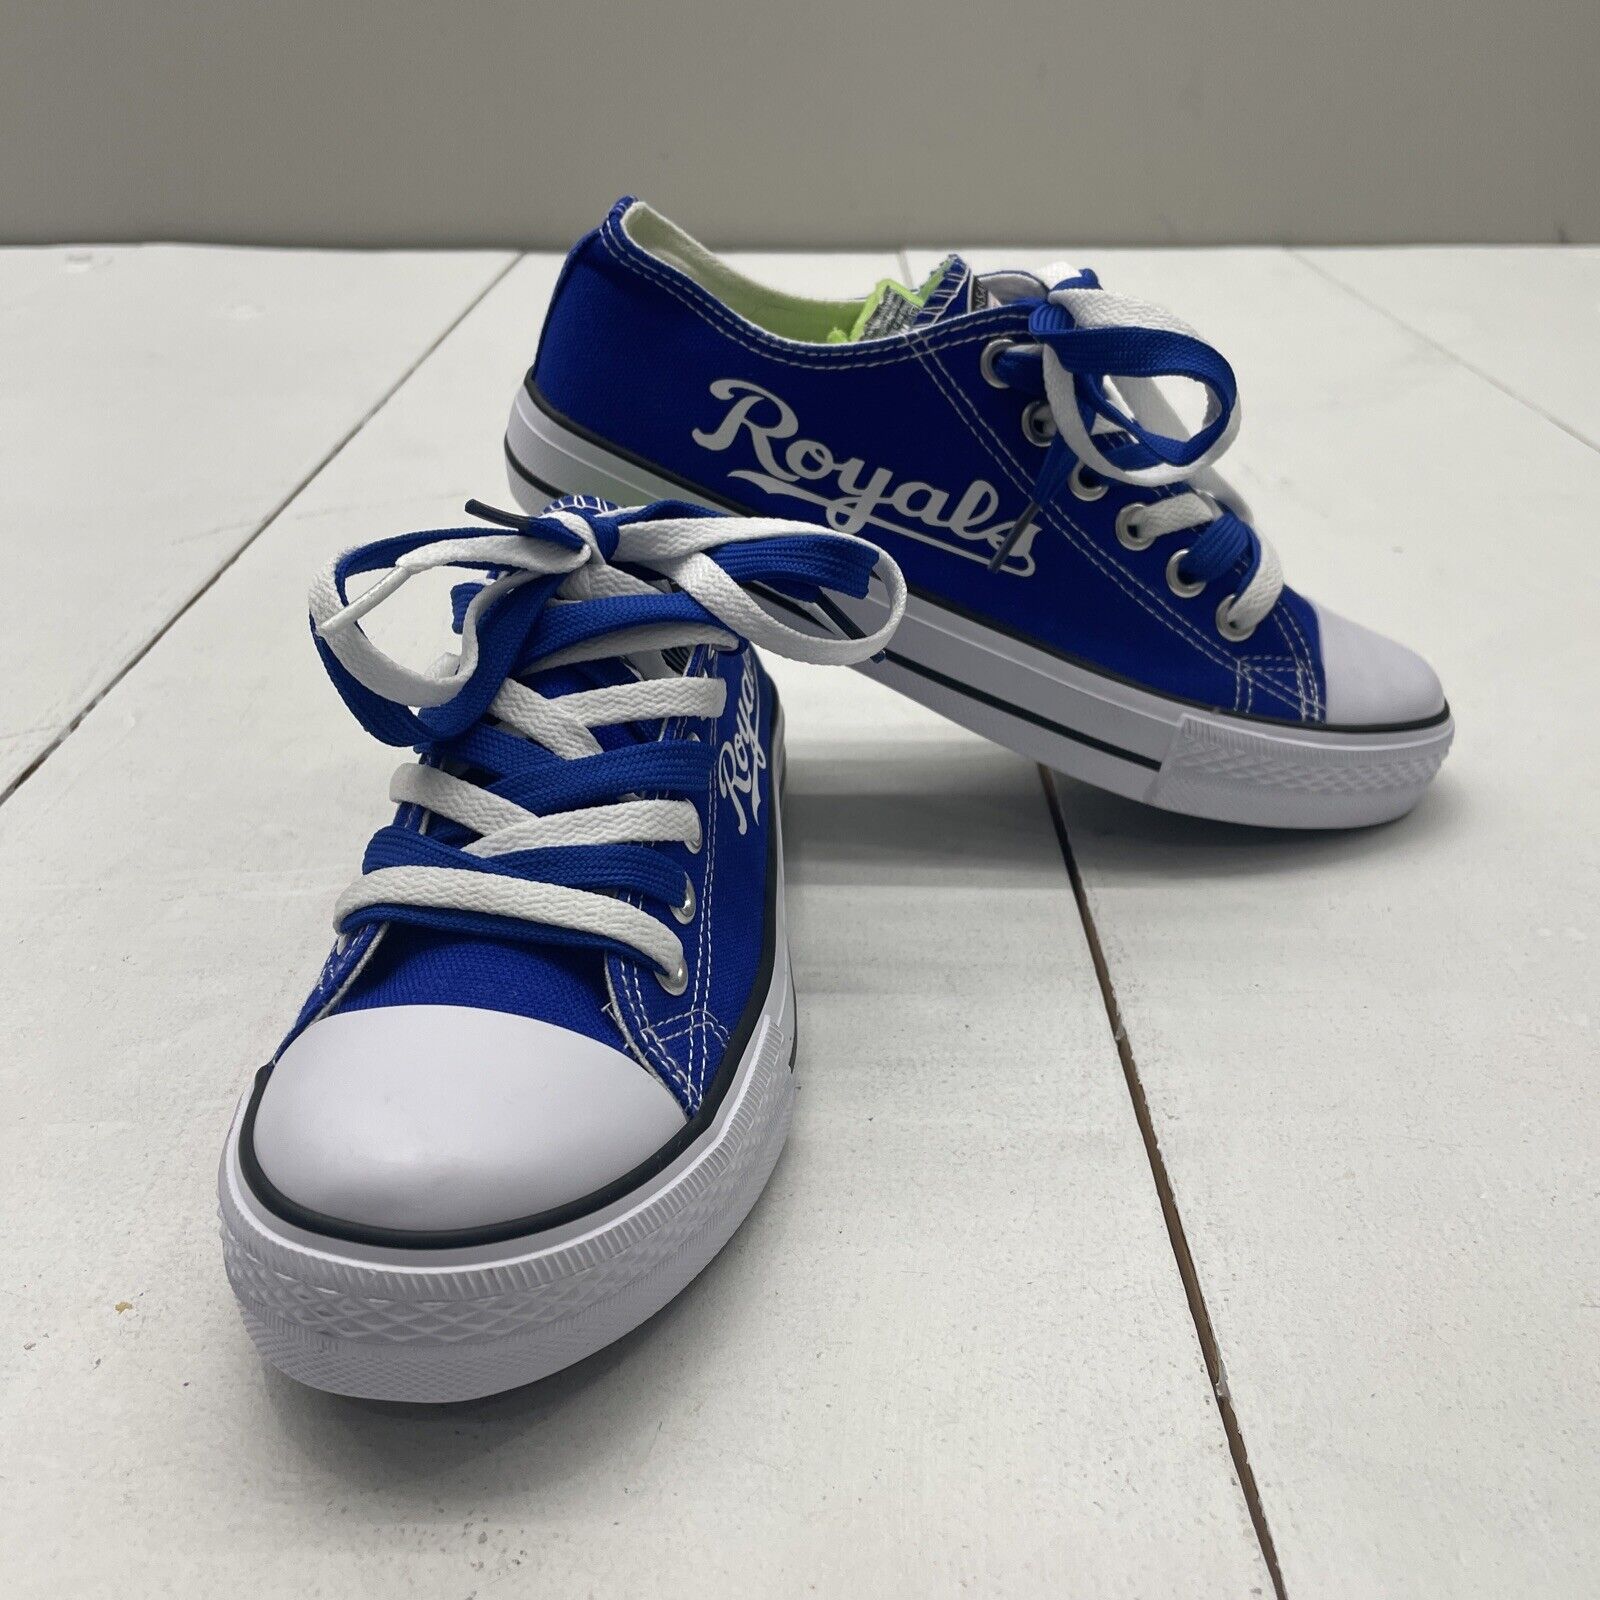 Kansas City Royals Blue Double Lace Sneakers Baseball Casual Shoes Wom -  beyond exchange